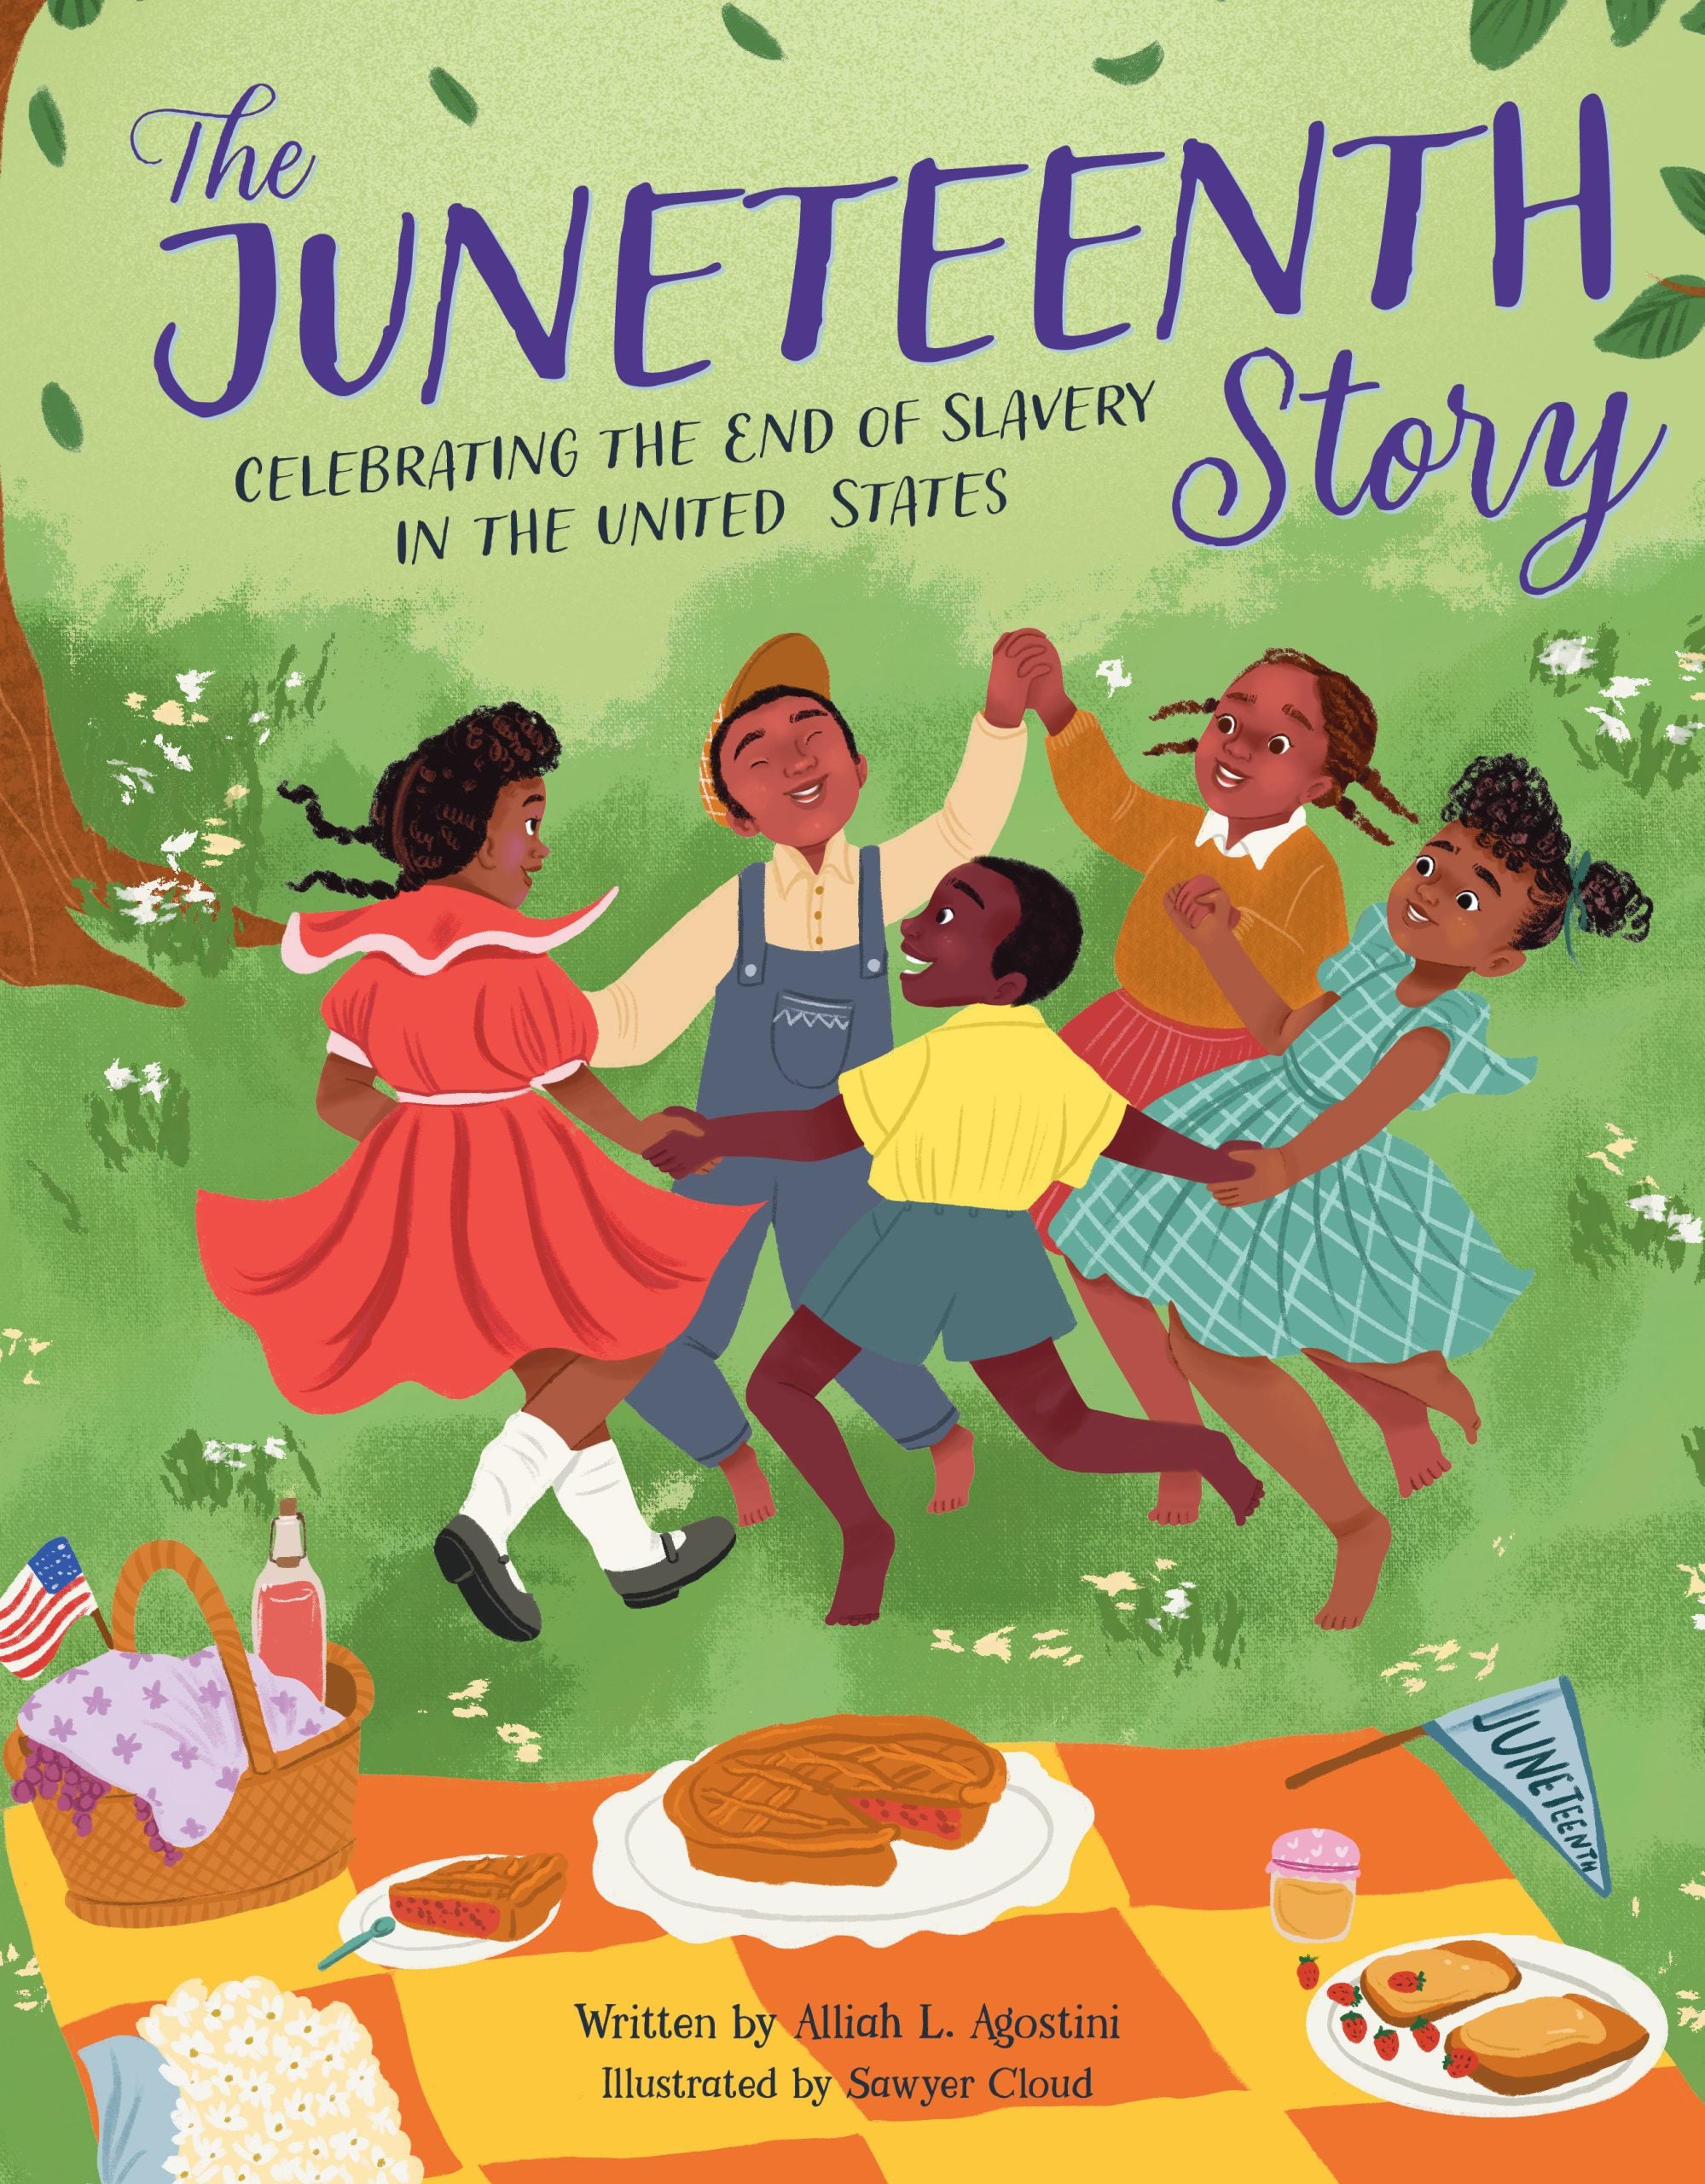 Meet The Author Teaching Kids About Everything From Juneteenth To Dancehall Music With Her Books